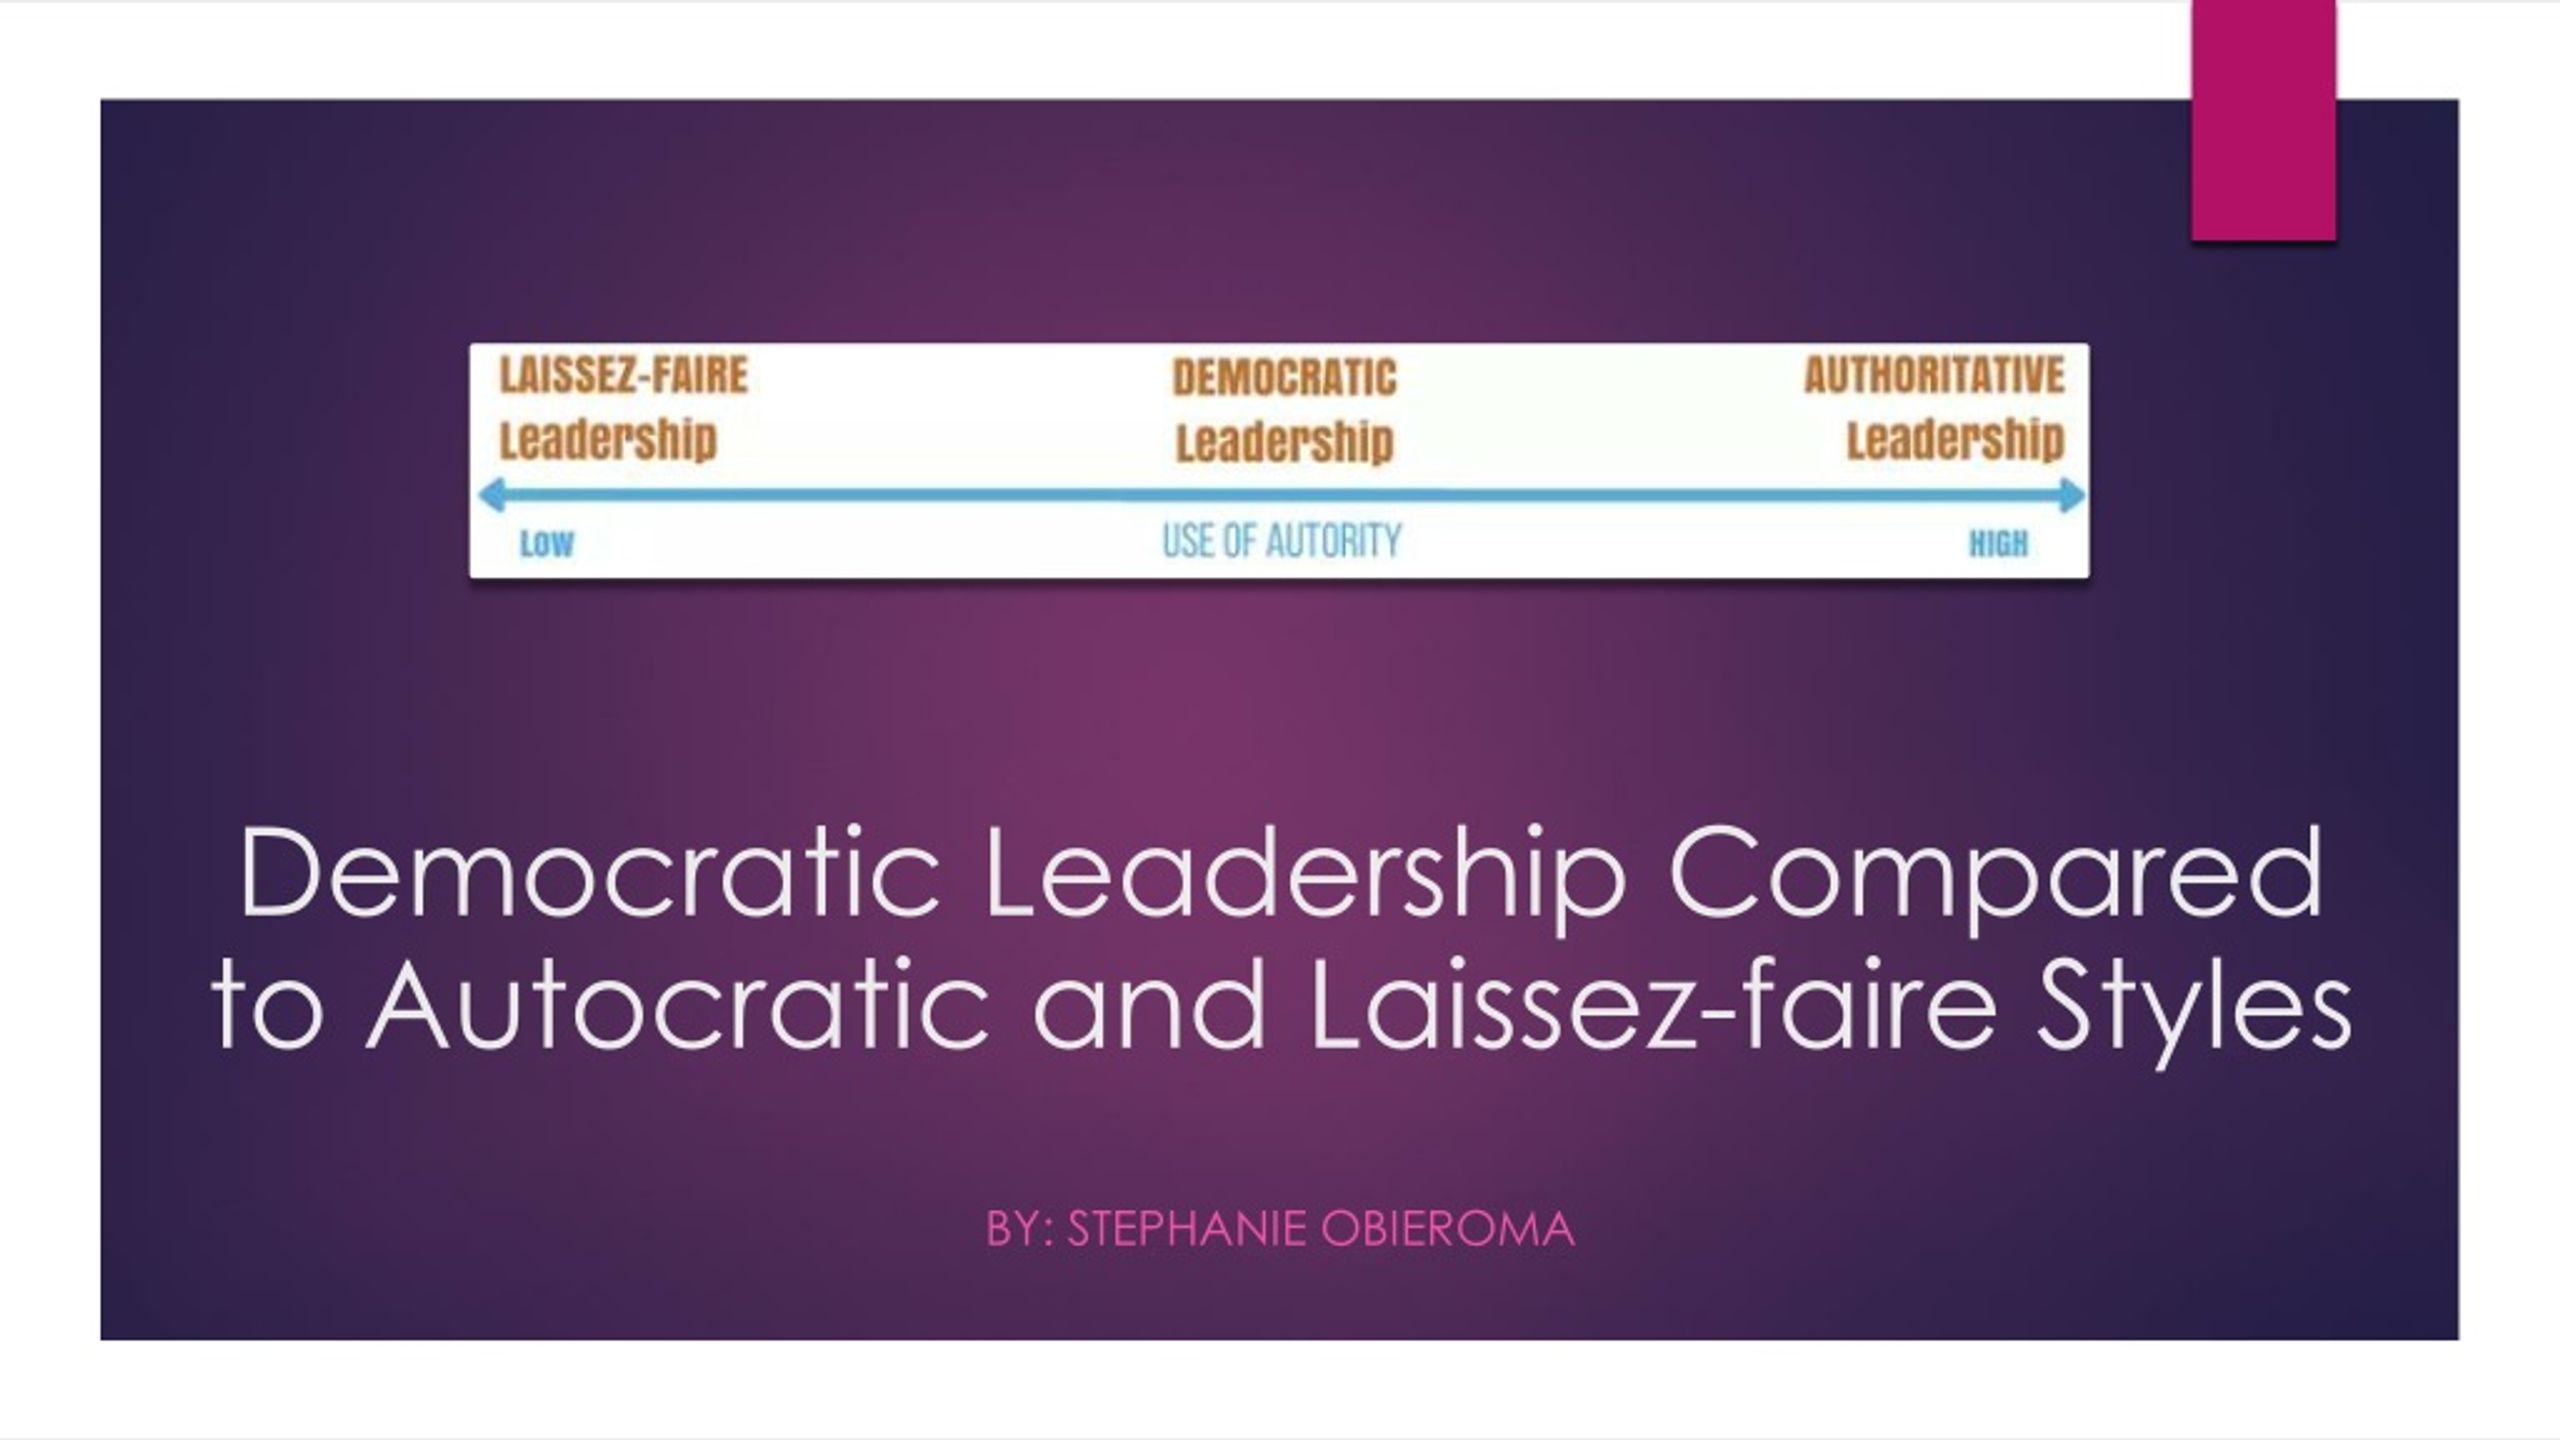 PPT - Democratic Leadership Compared to Autocratic and Laissez-faire Styles  PowerPoint Presentation - ID:246204